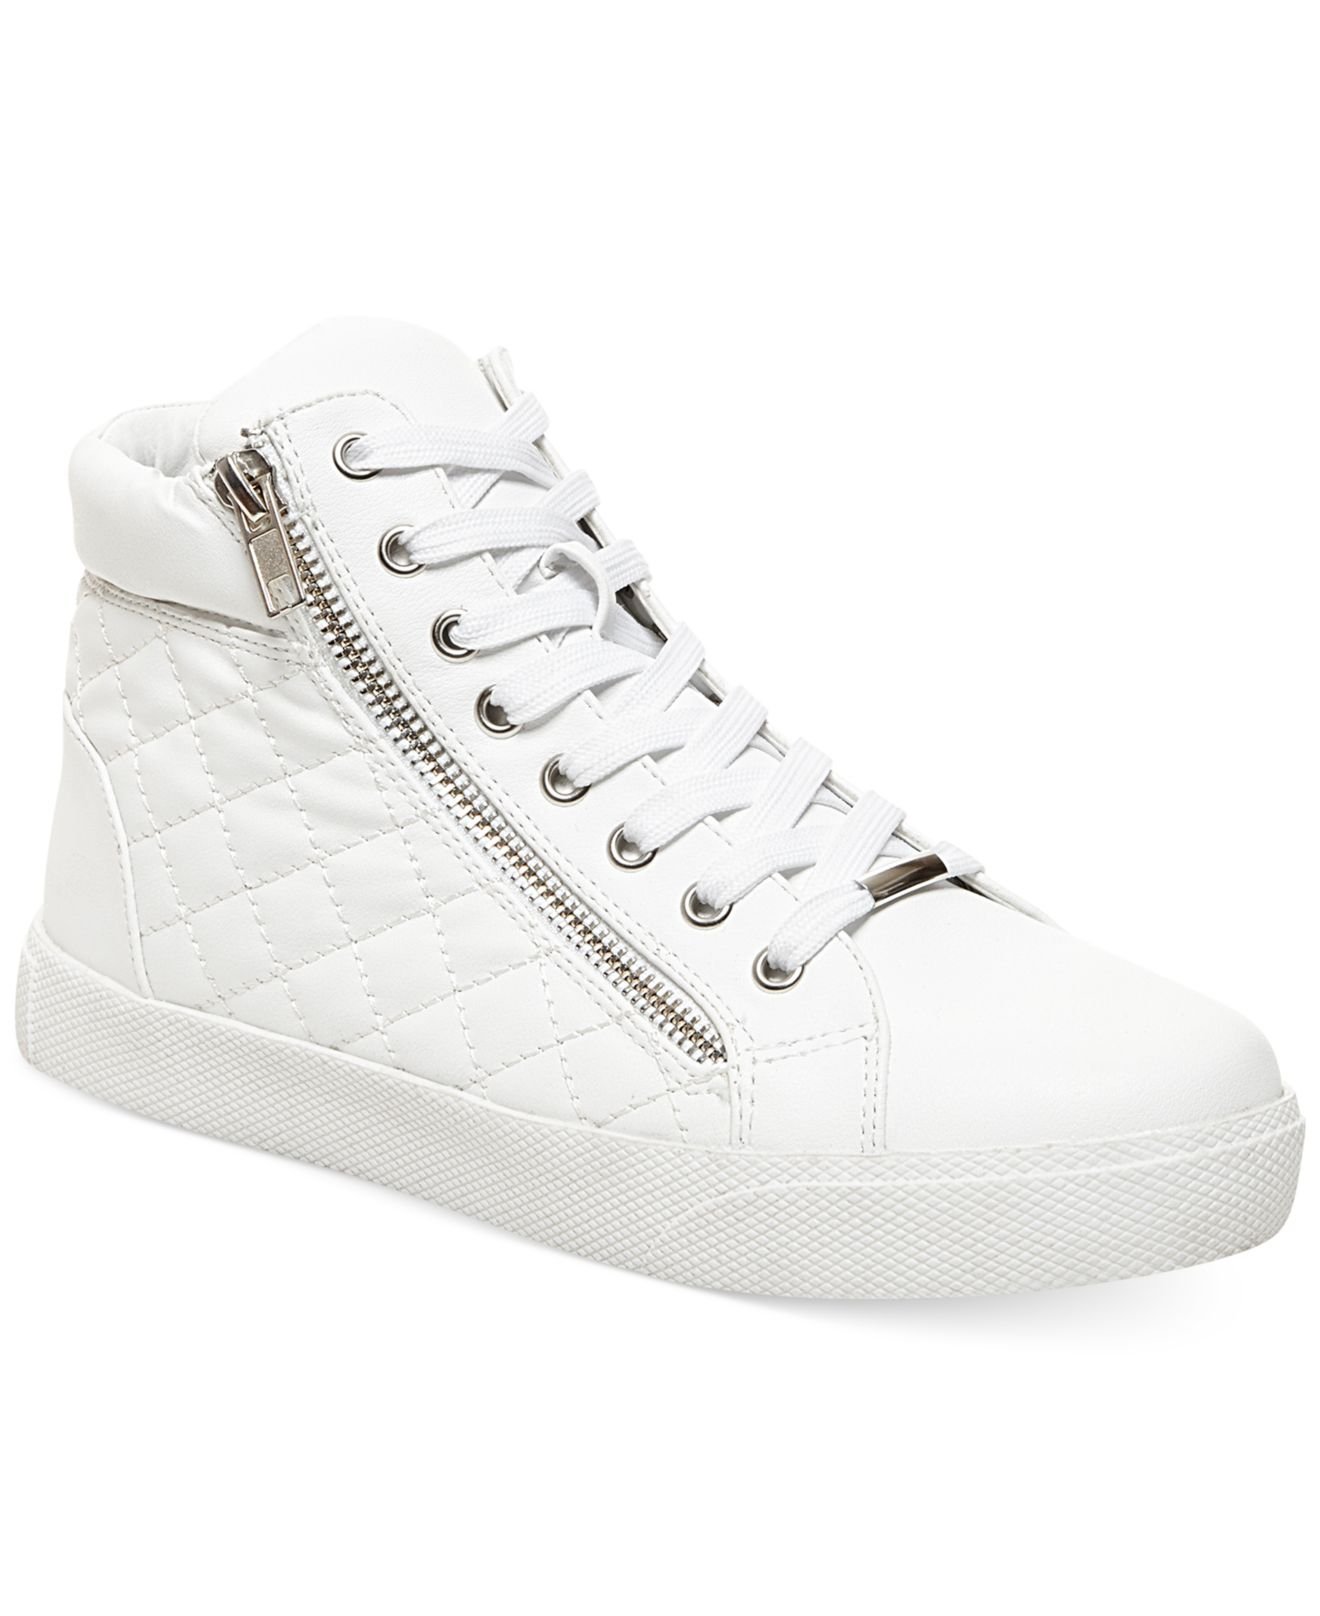 Steve Madden Decaf Hightop Quilted Platform Sneakers in White | Lyst